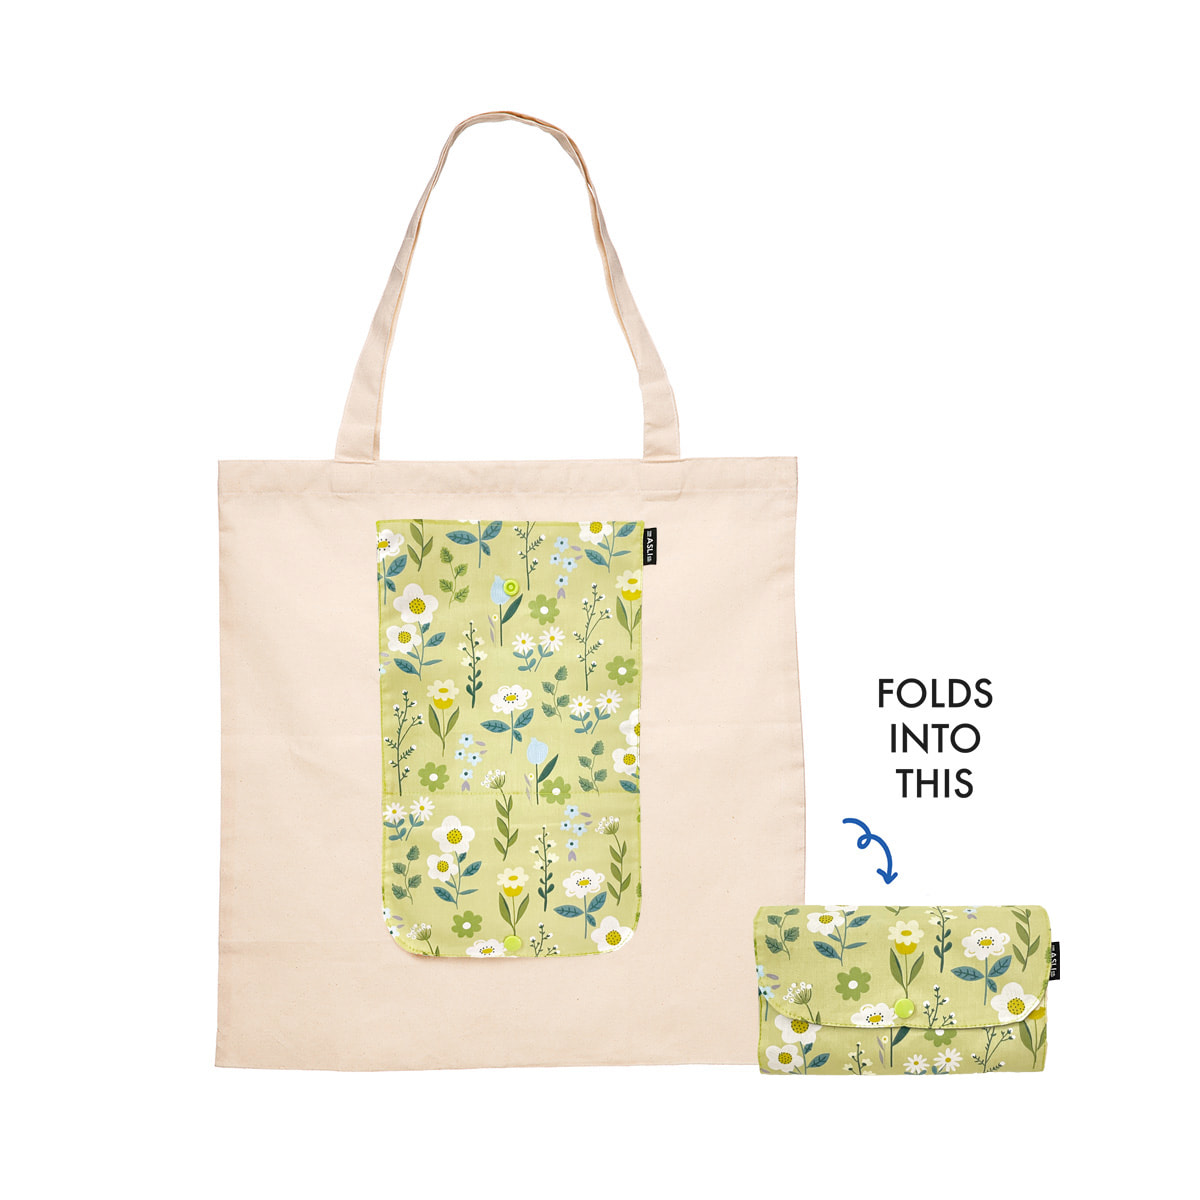 Green Floral - The Asli Co. Eco-friendly Reusable Tote Bag